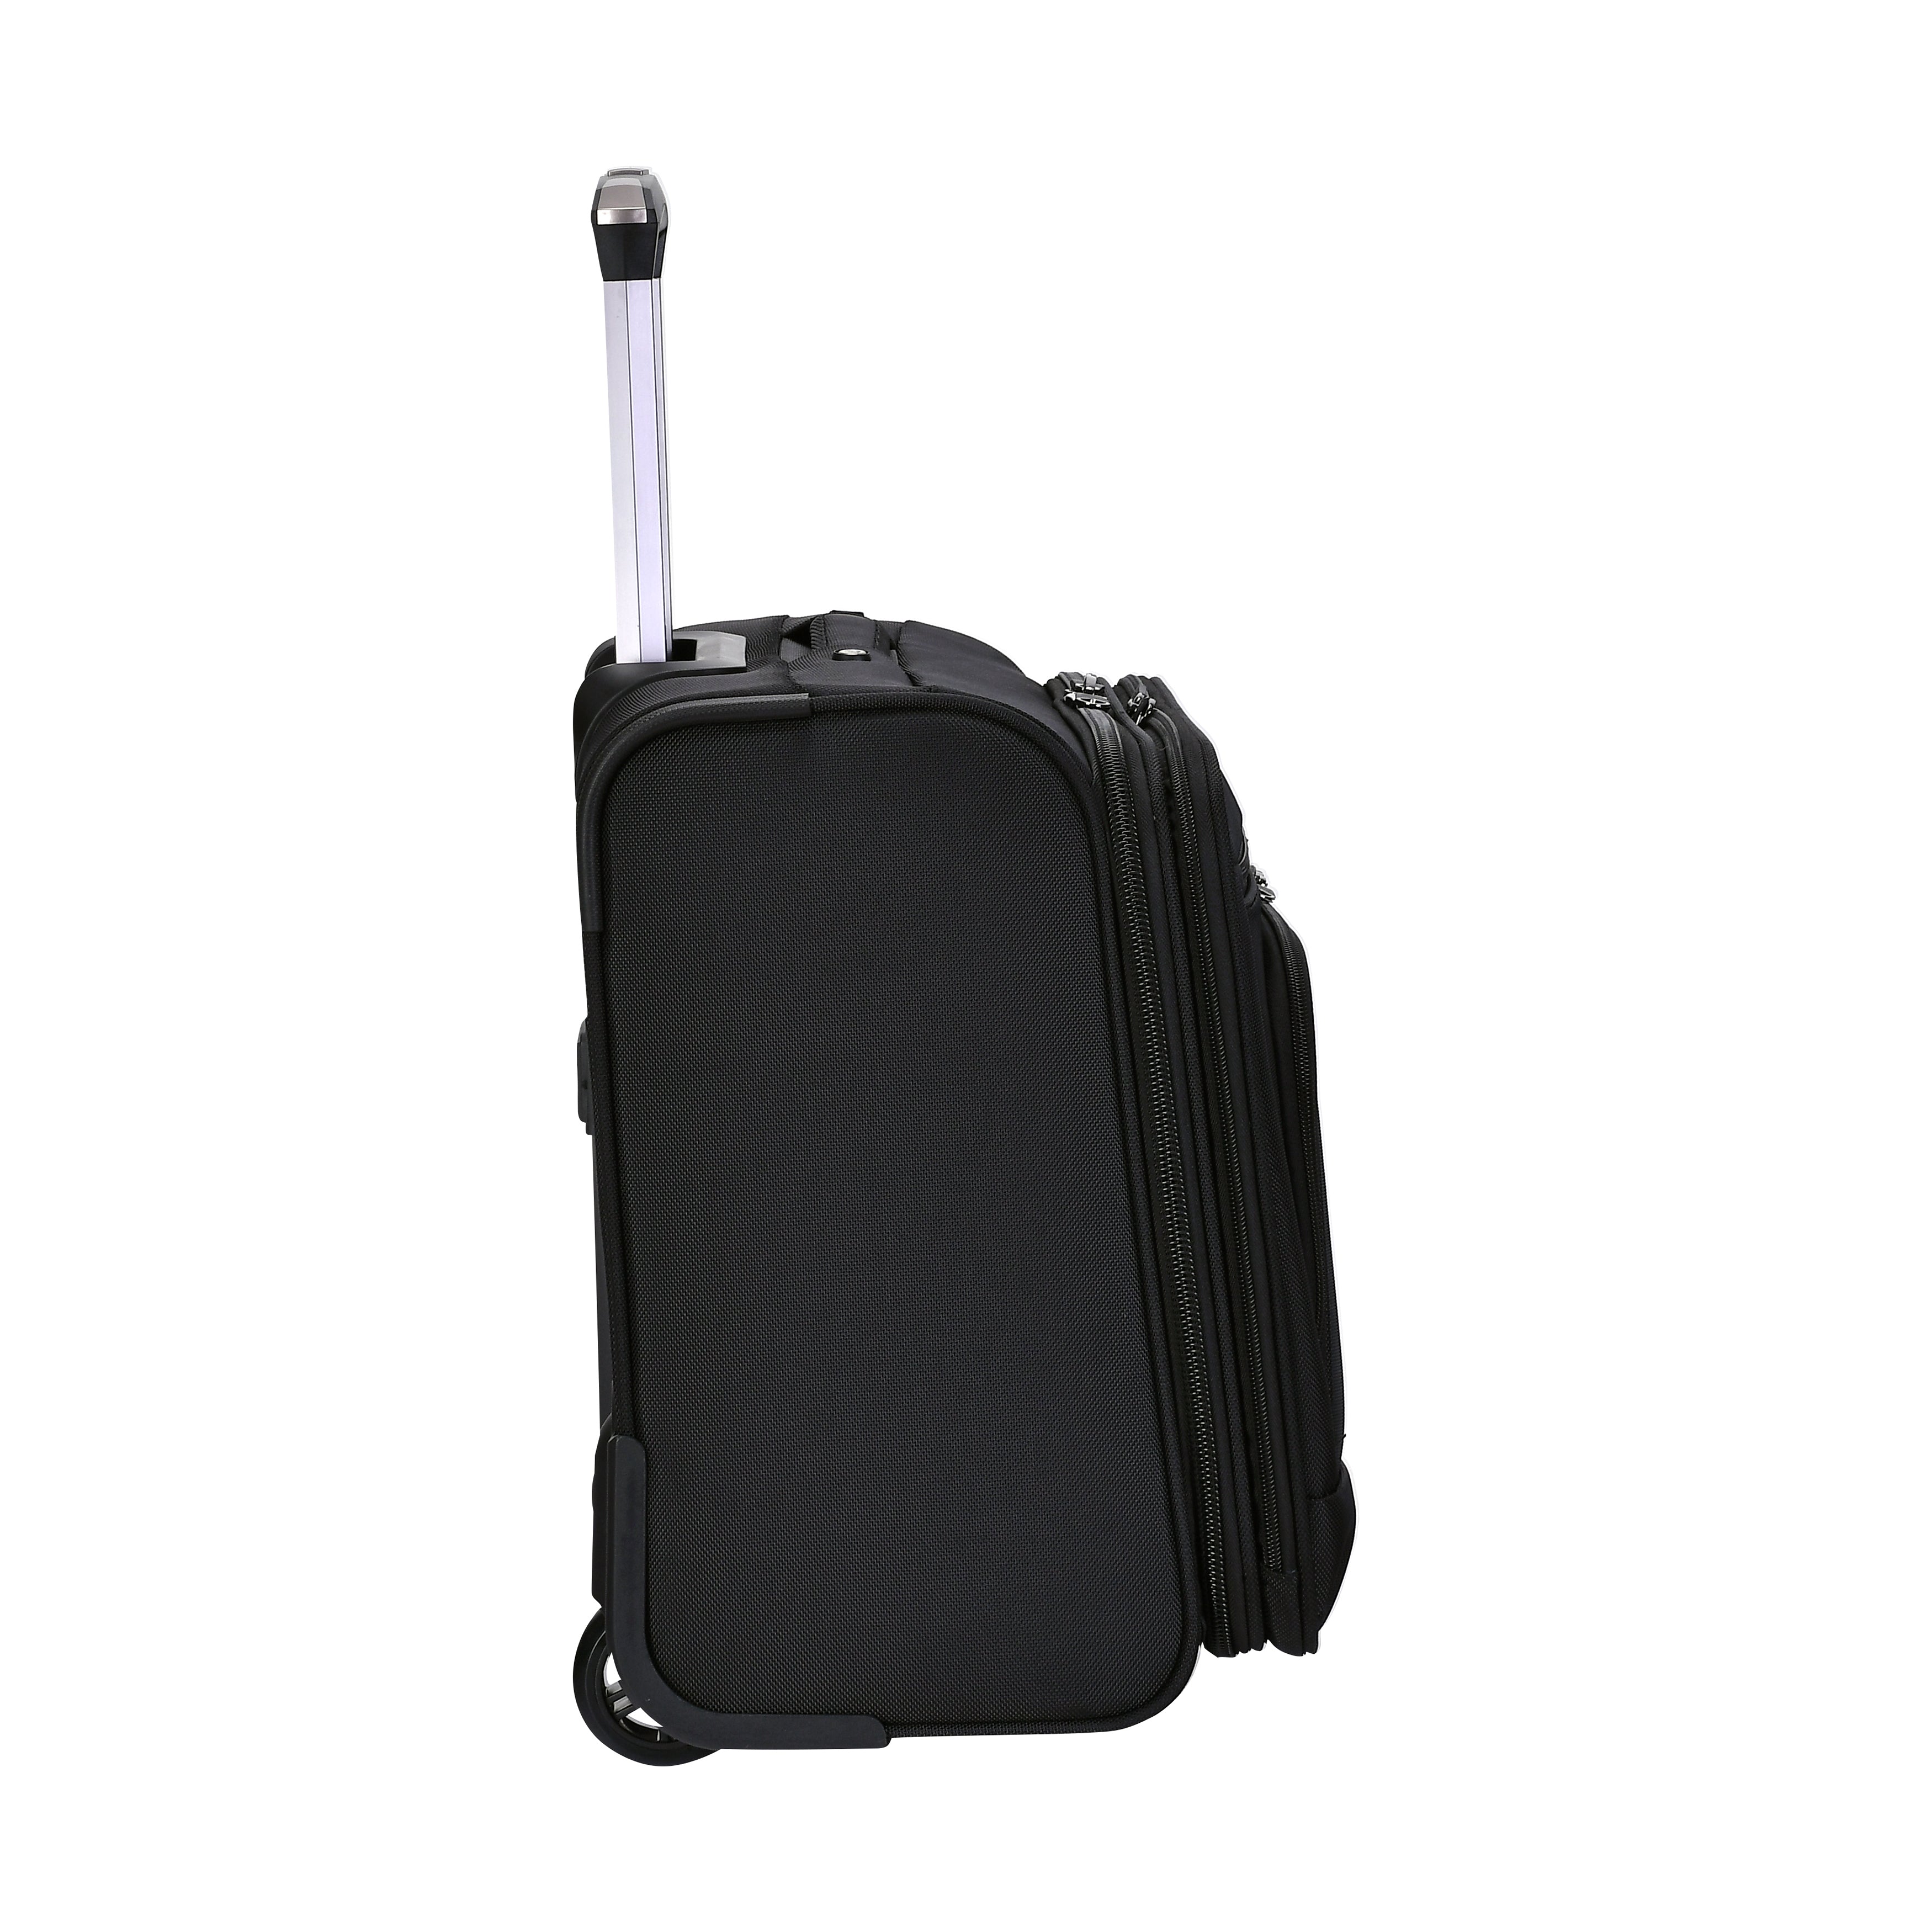 Eminent 17-inch 2 Wheeled Suitcase Premium Pilot case Trolley with Multi Compartments and RFID pockets, V324A-17